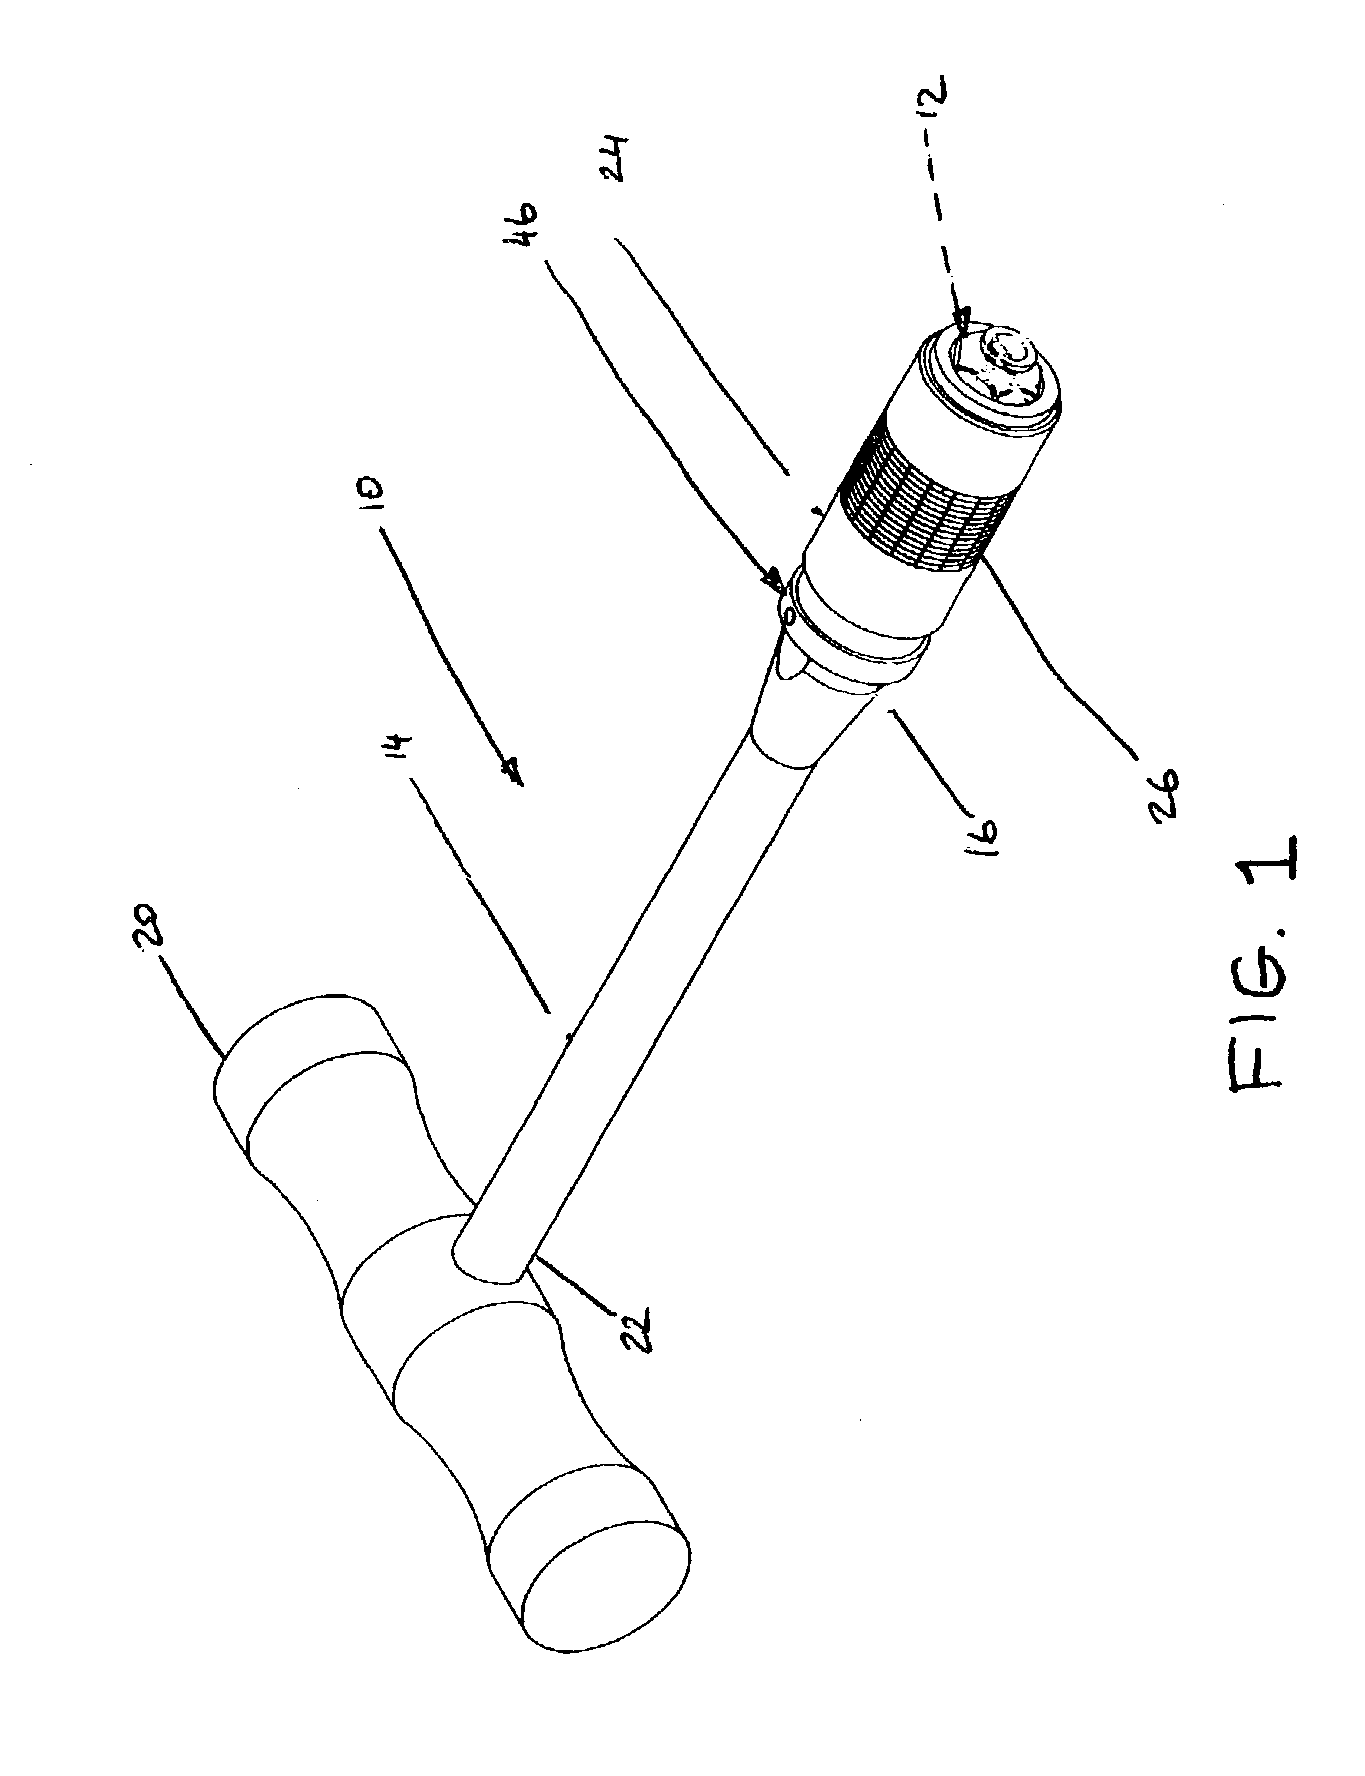 Hand-held instrument holder for surgical use